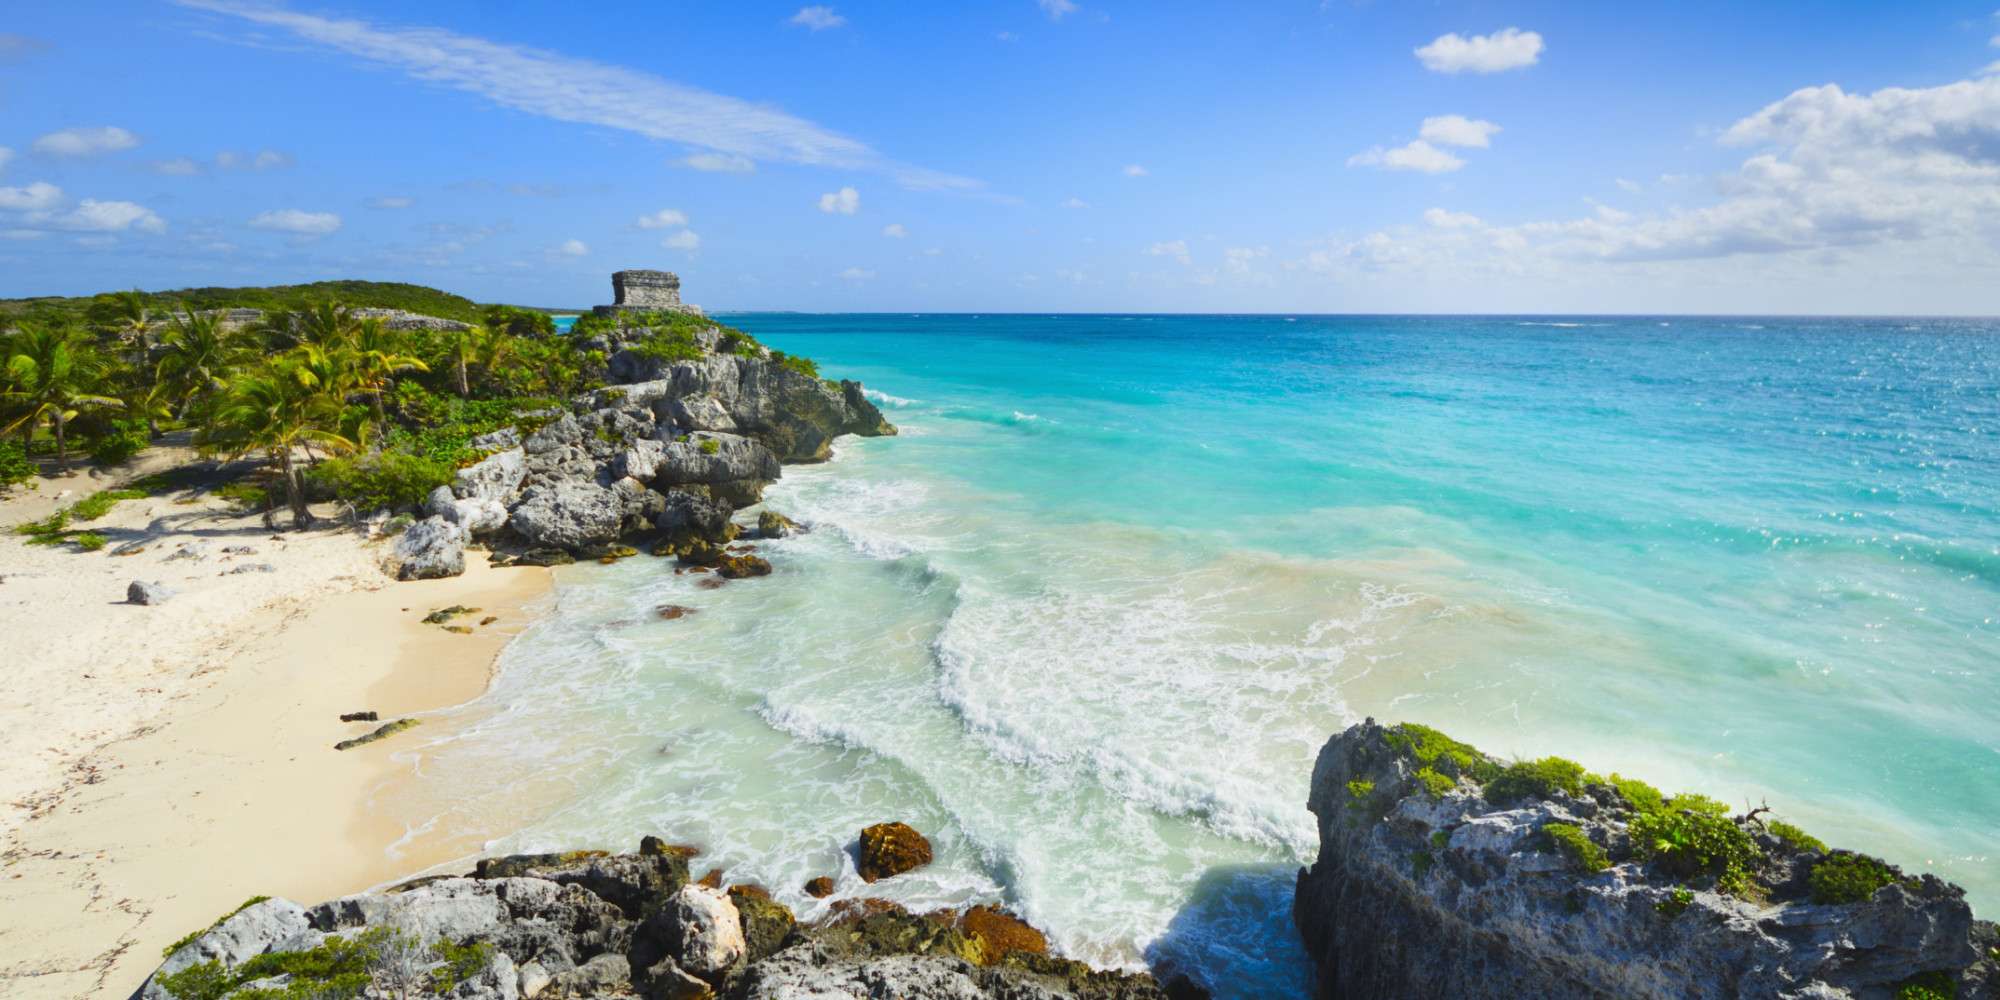 17 Spots That Make Mexico One Of The Prettiest Places On ...